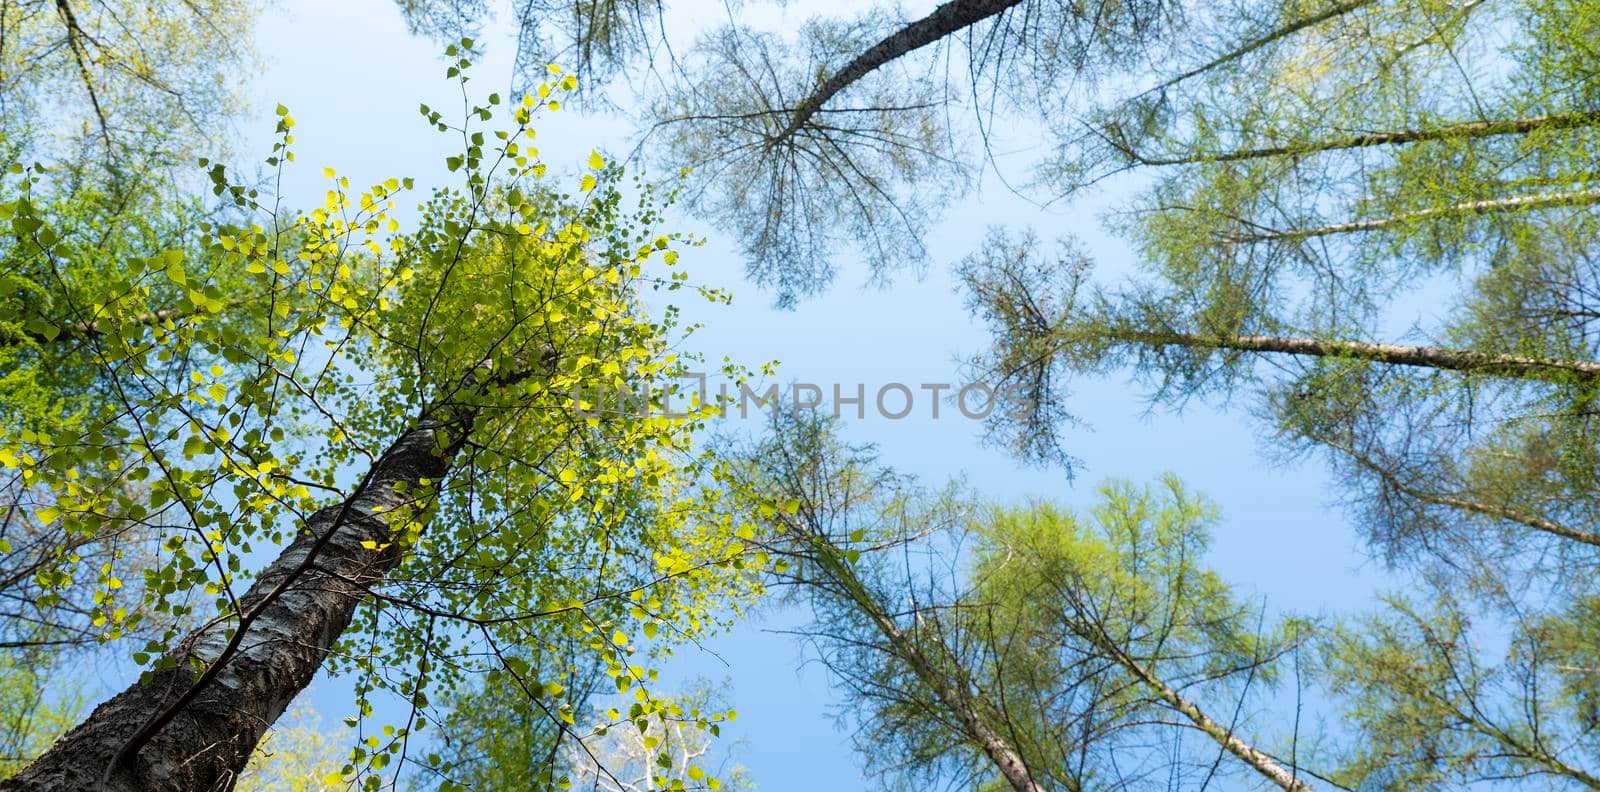 looking up to birch and larch trees with fresh spring leaves against blue sky